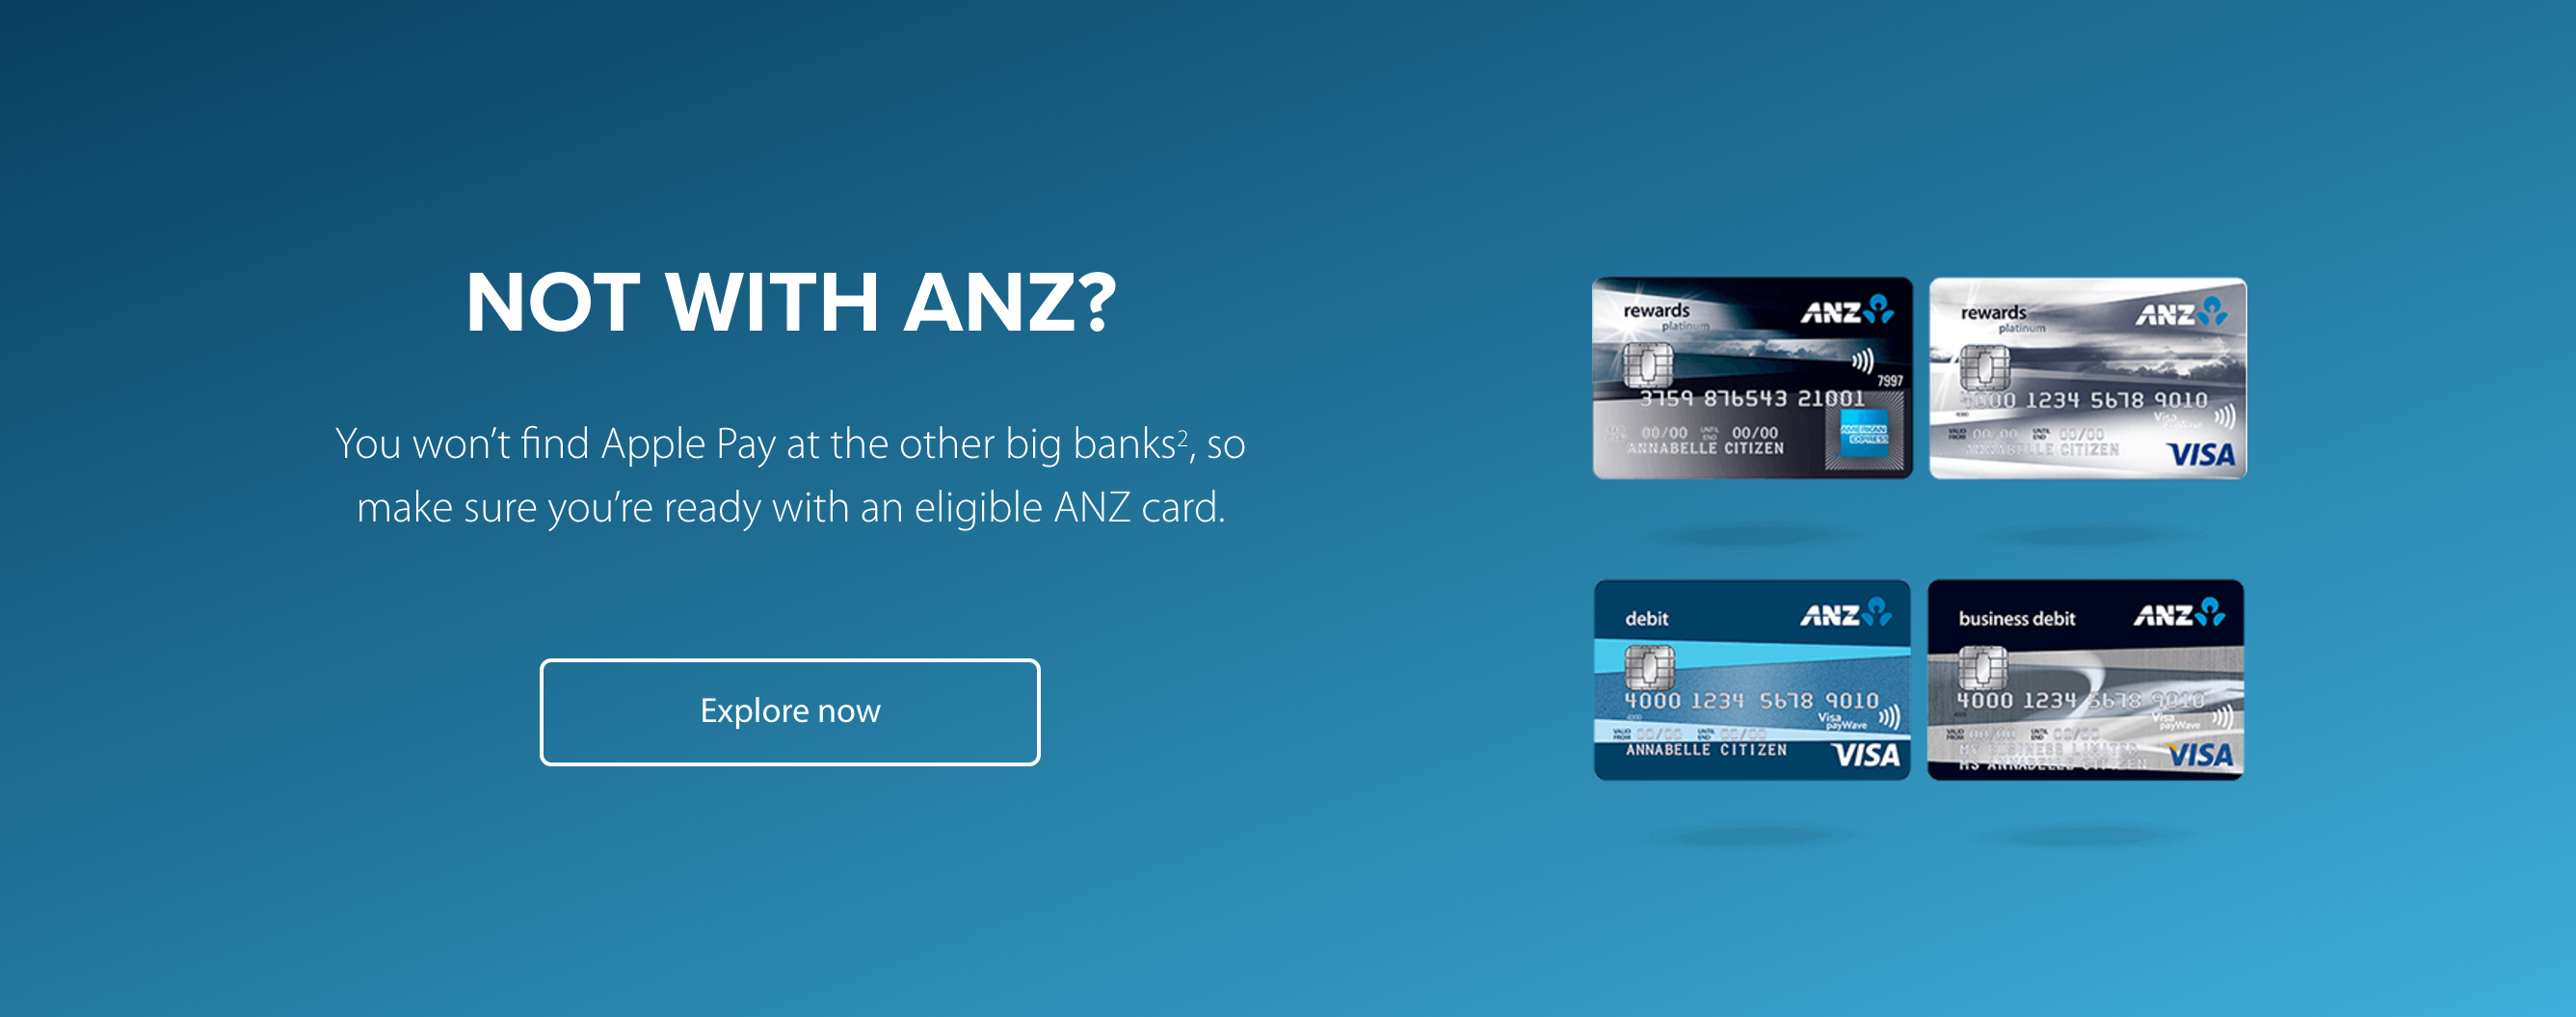 ANZ Apple Pay Not With Other Big Banks